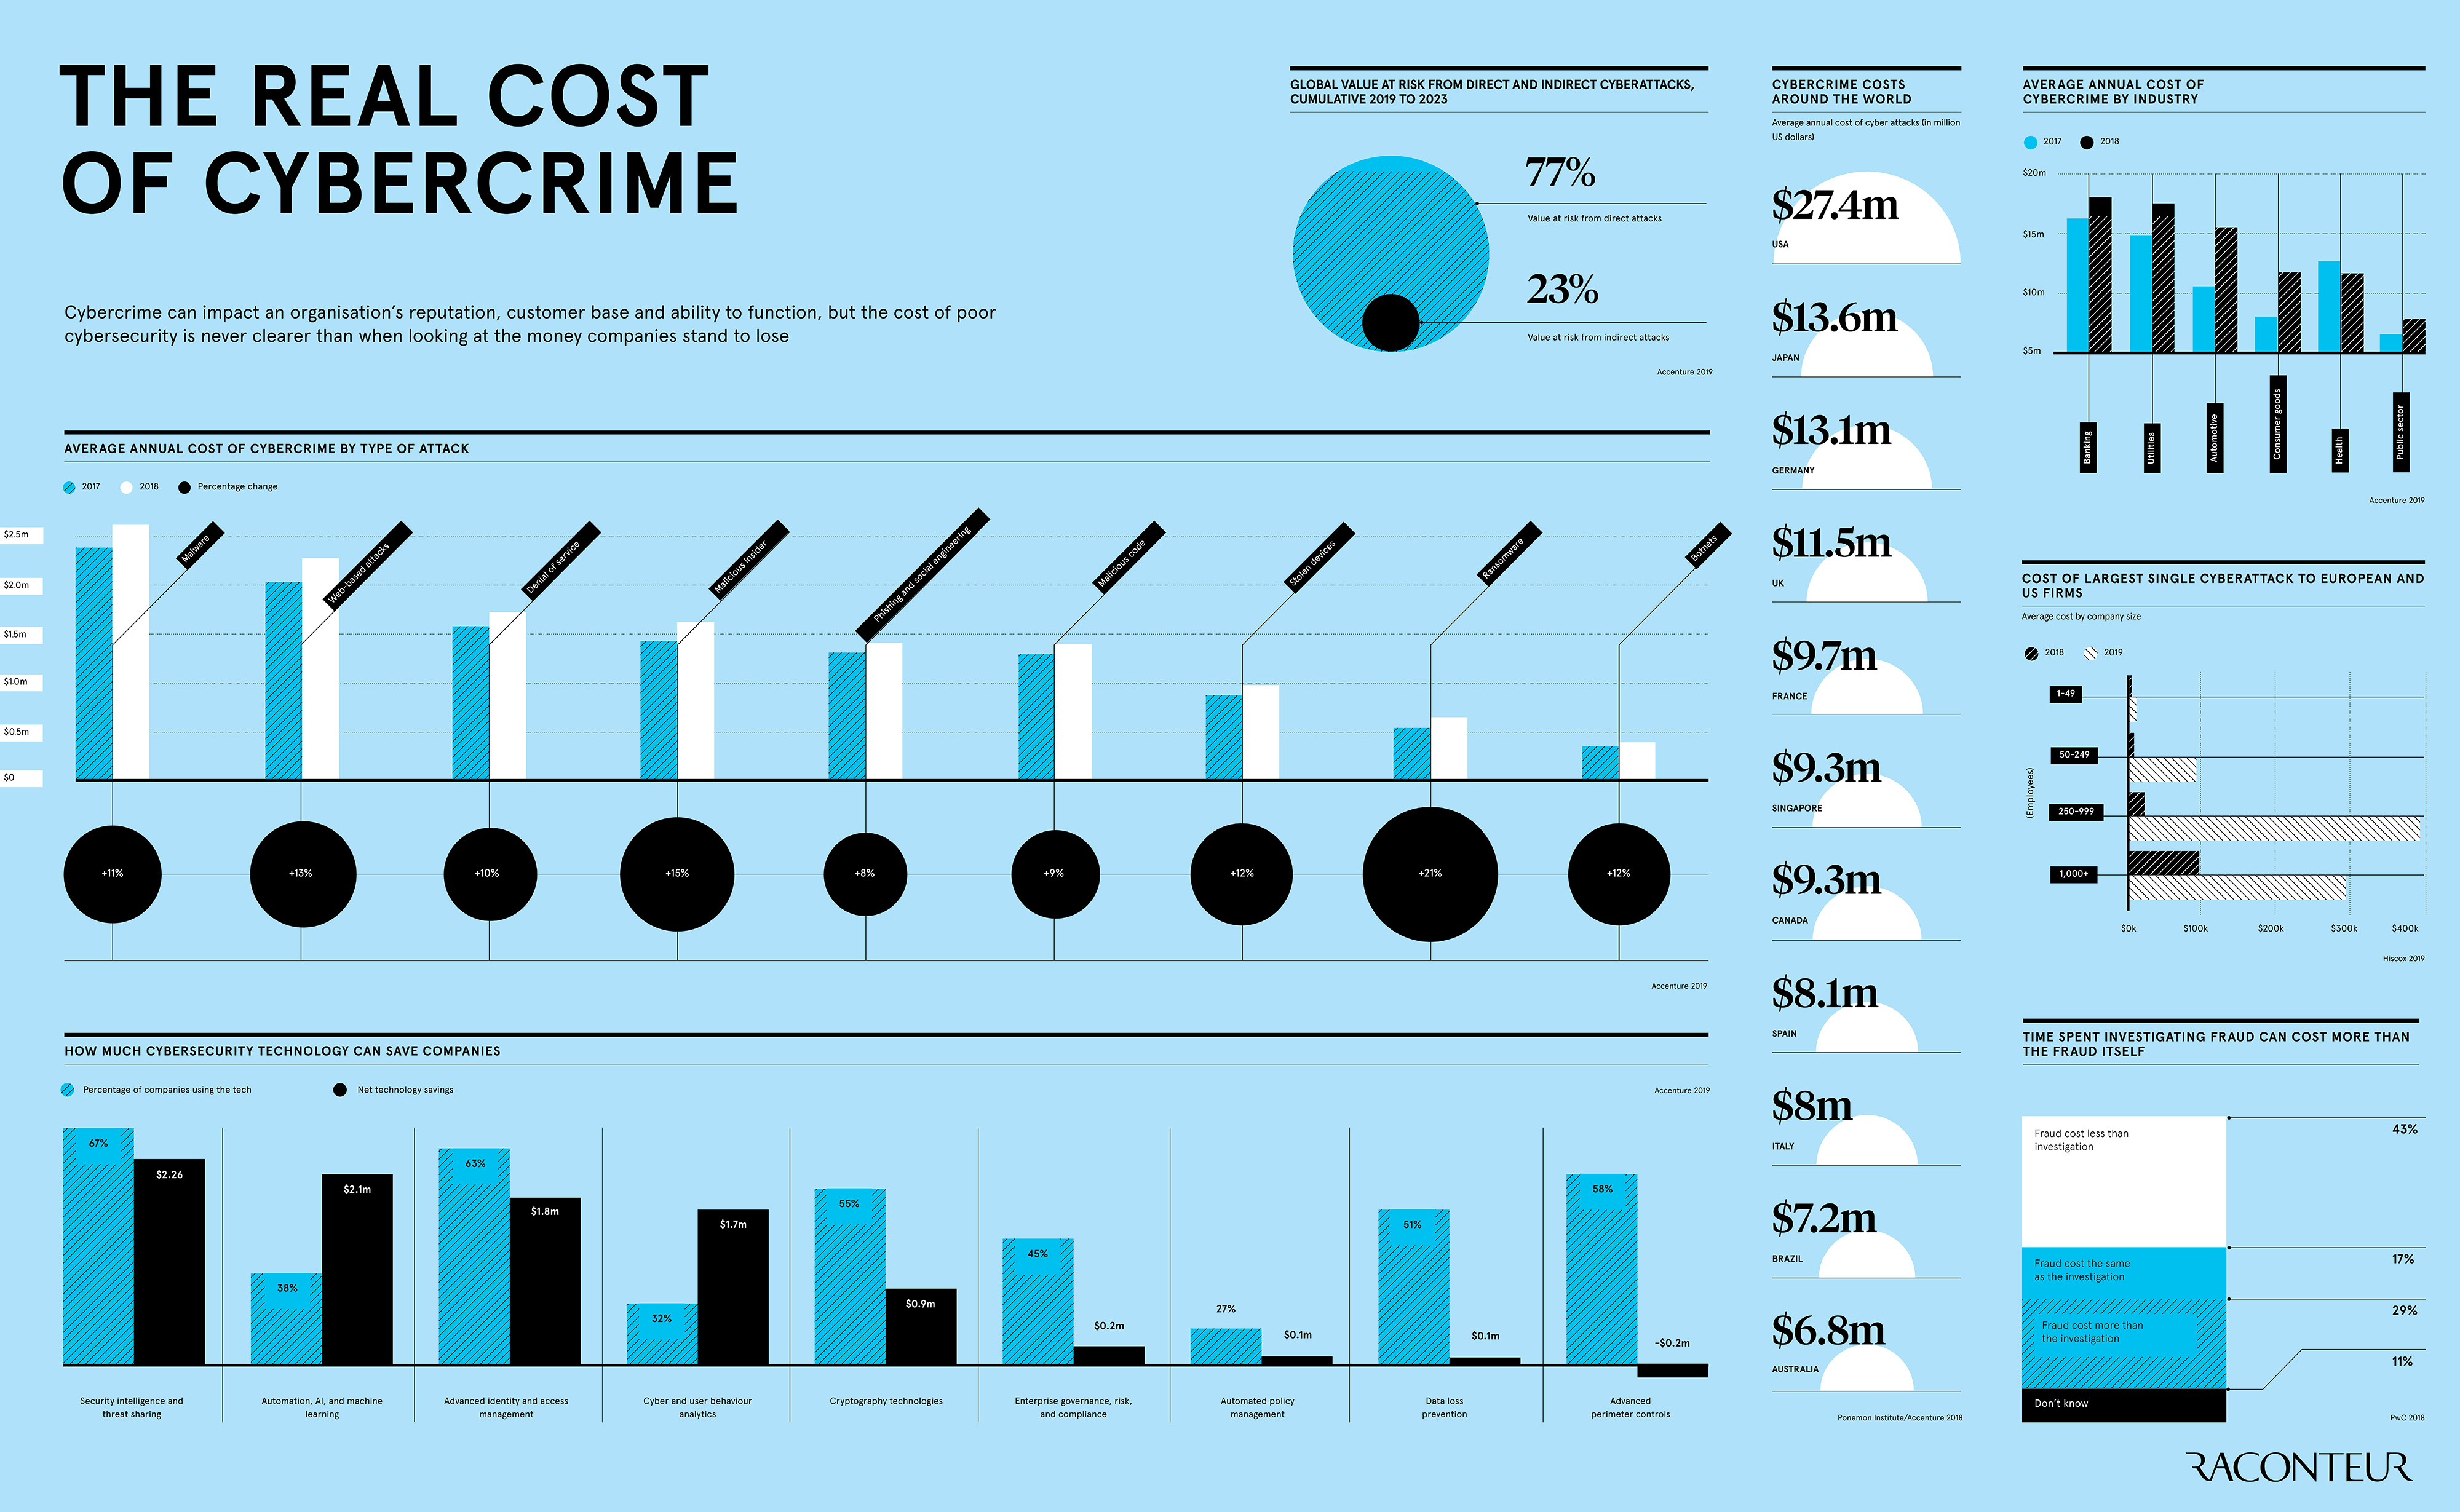 Cost of security breaches estimates for the next five years